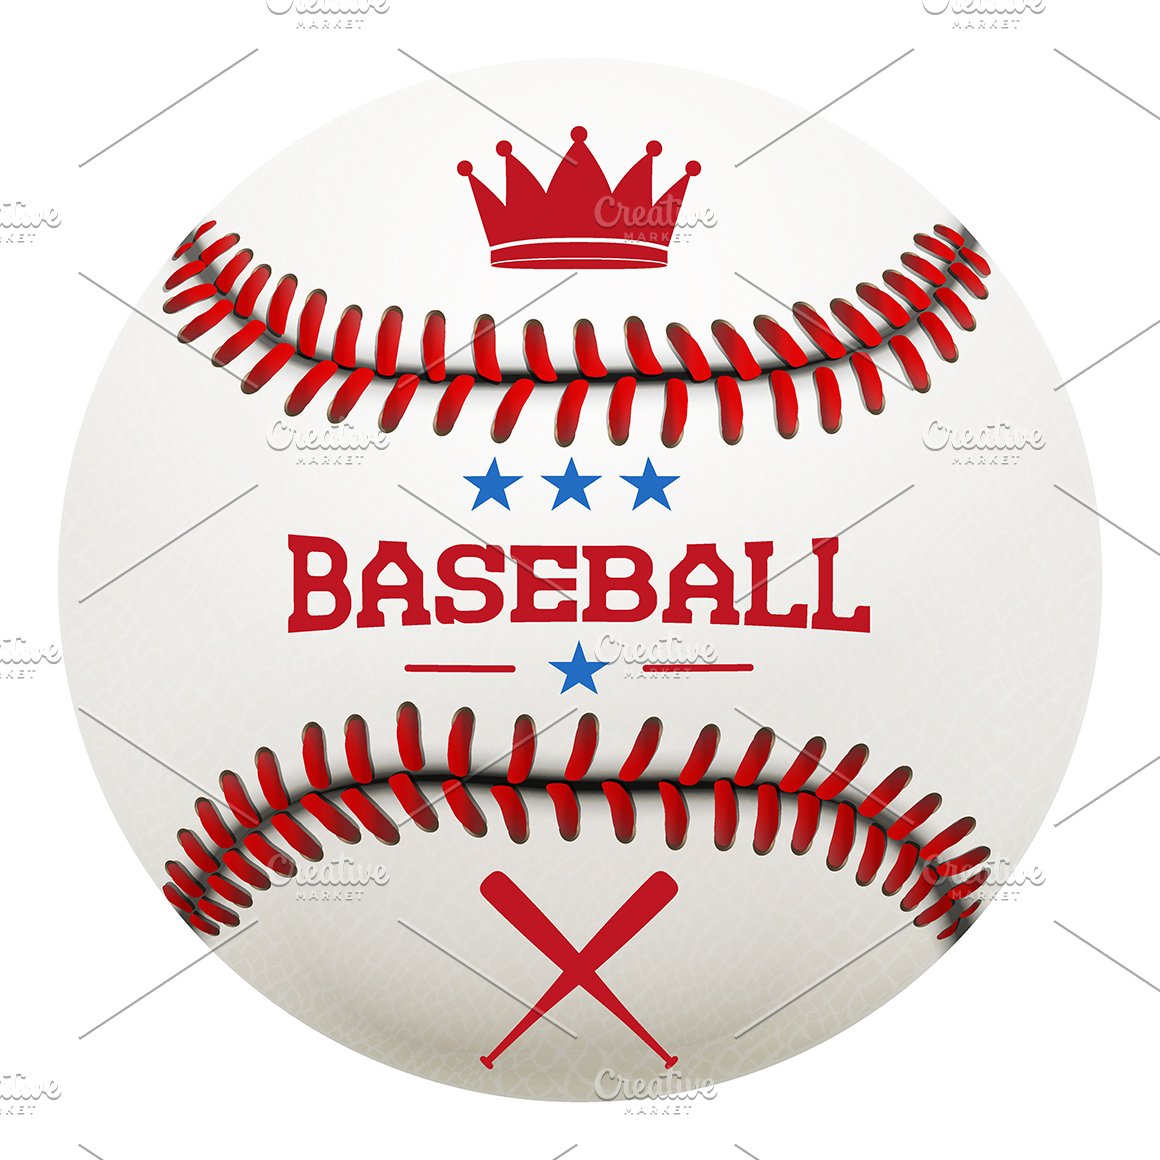 Baseball ball with stars and lettering.